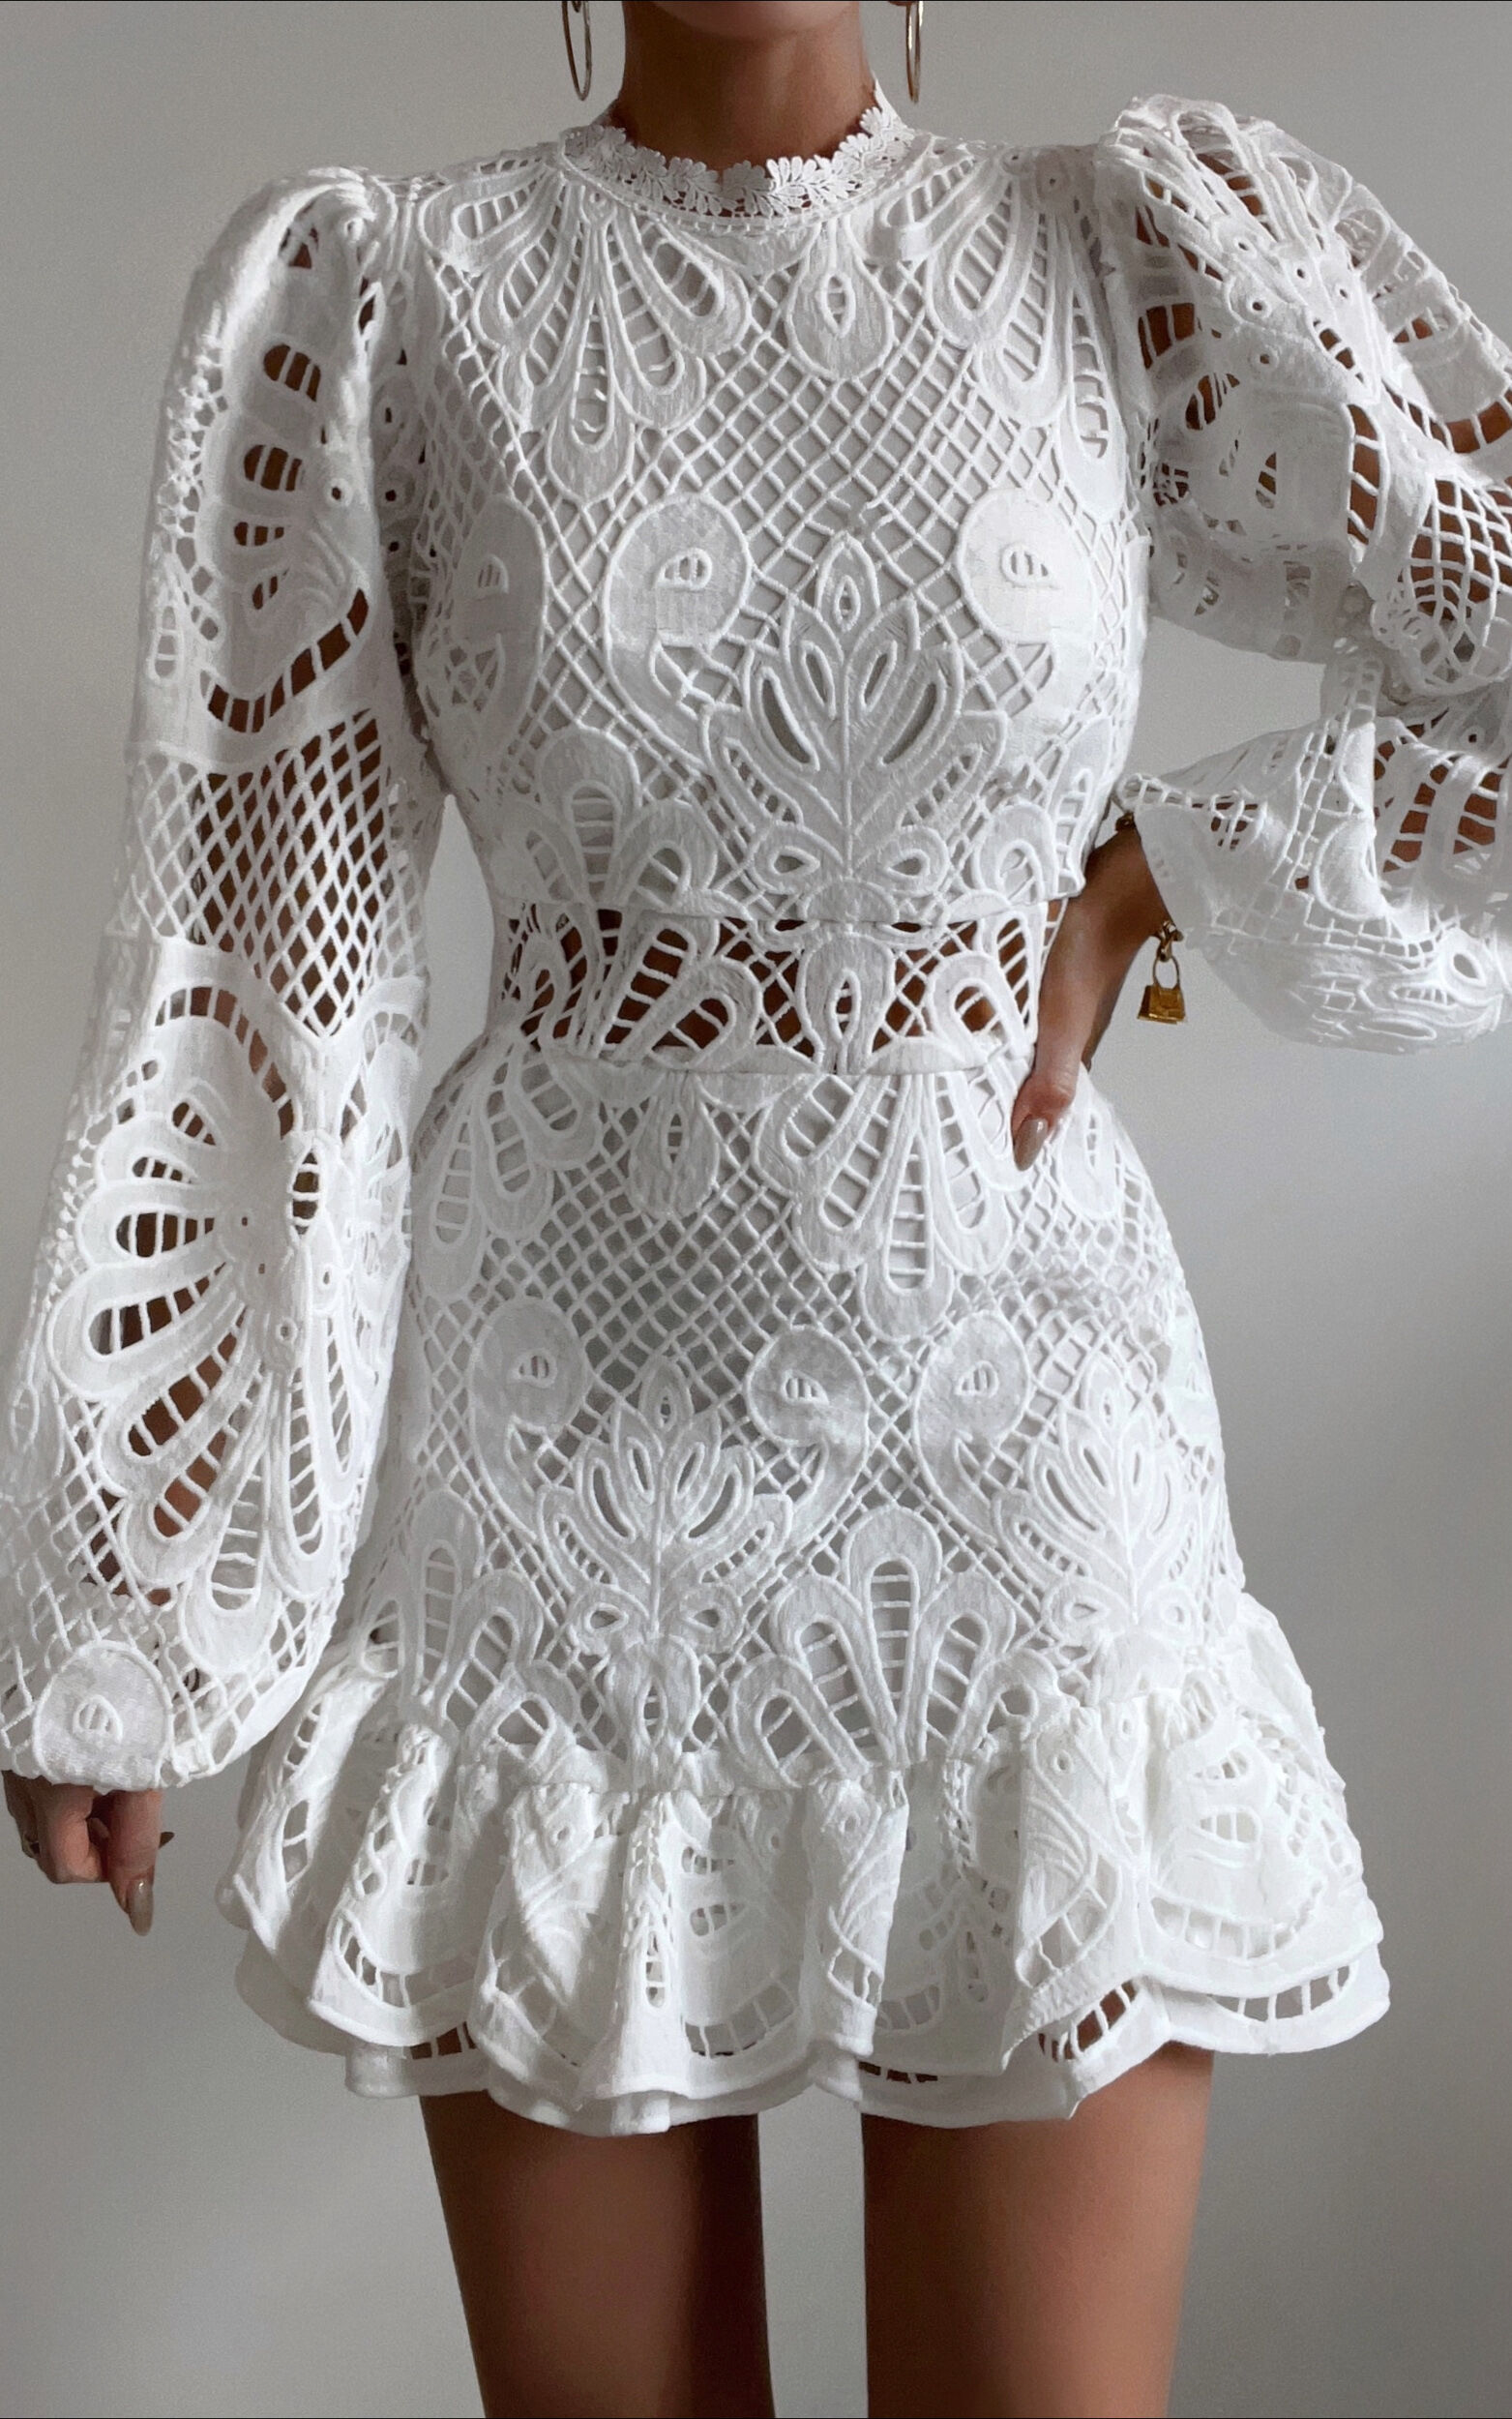 Kiss Me Now Mini Dress - Long Puff Sleeve Dress in White Lace - 06, WHT2